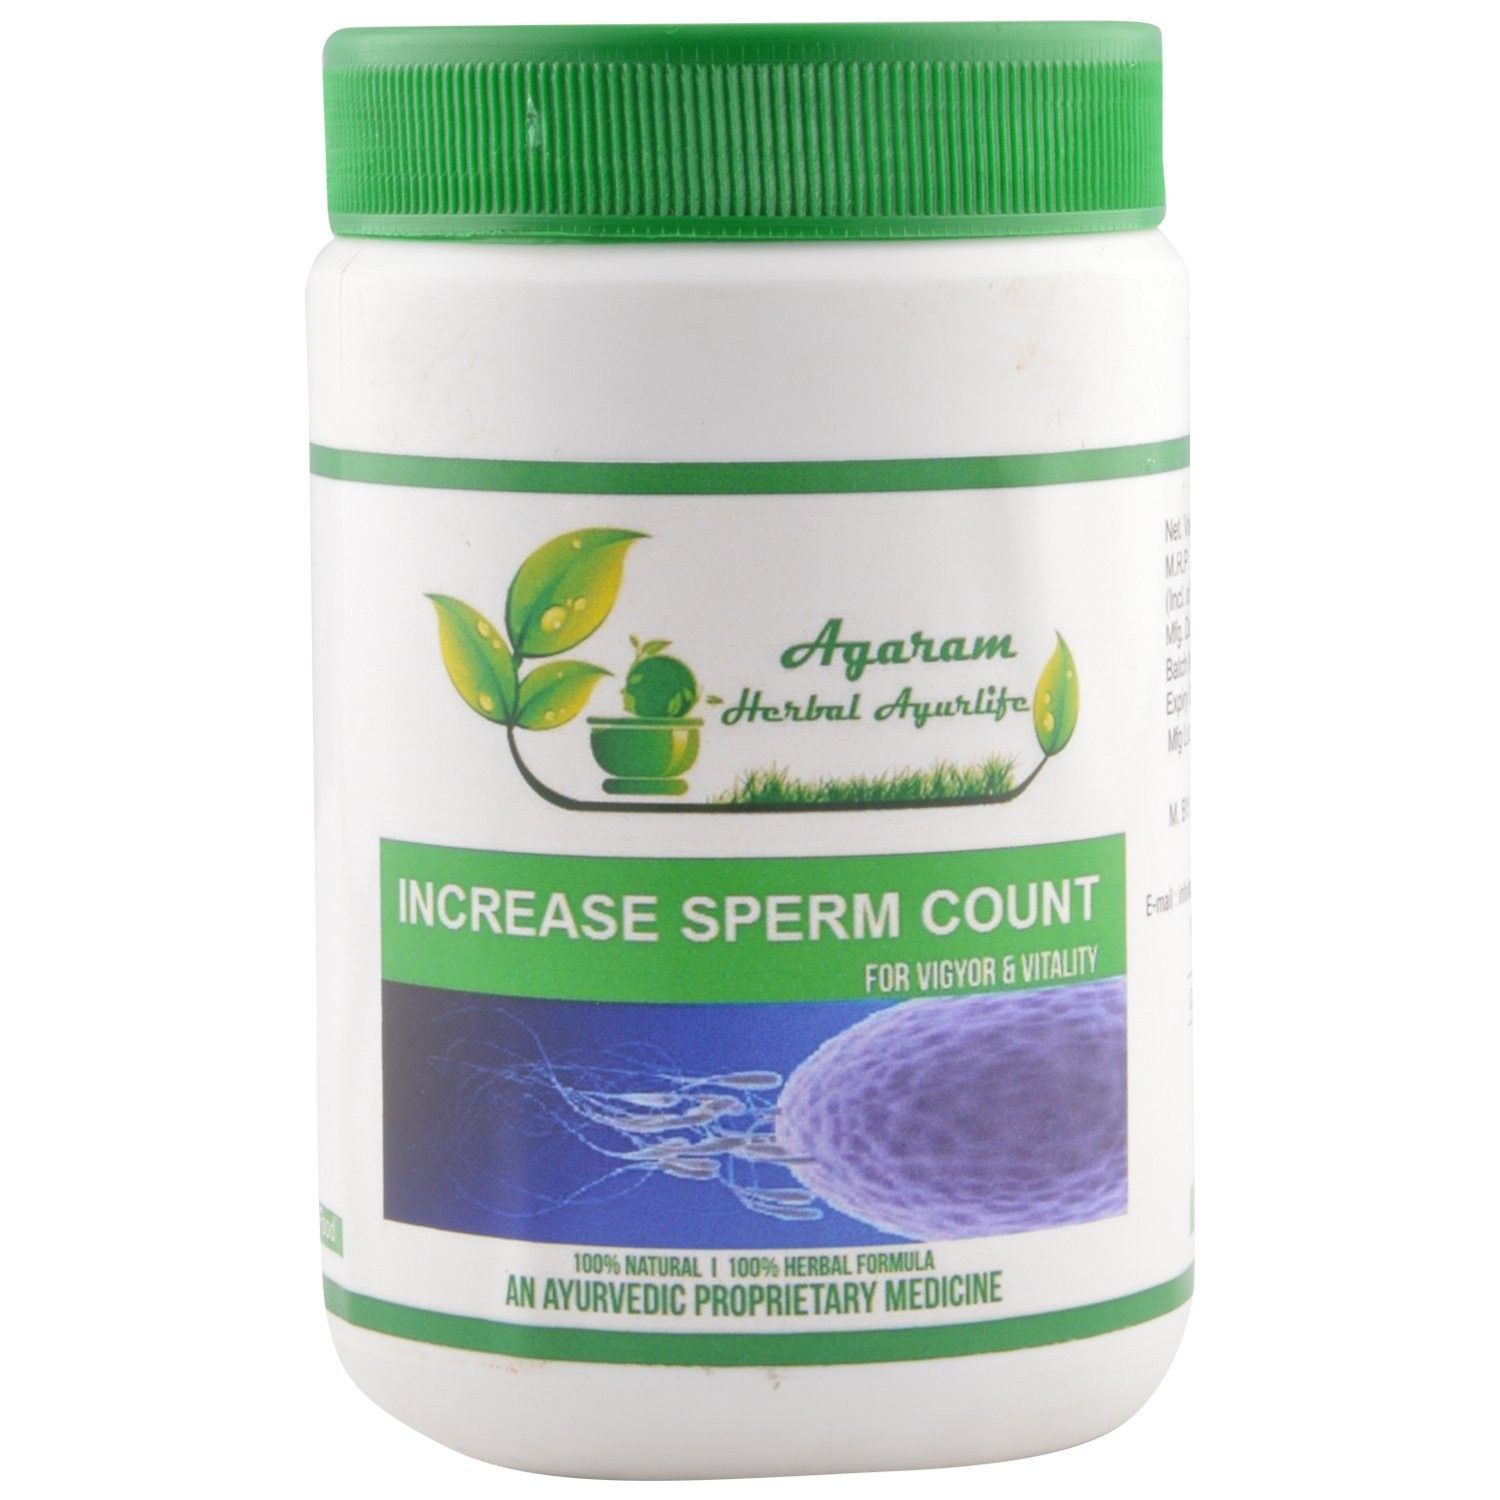 Supplements to increase sperm count